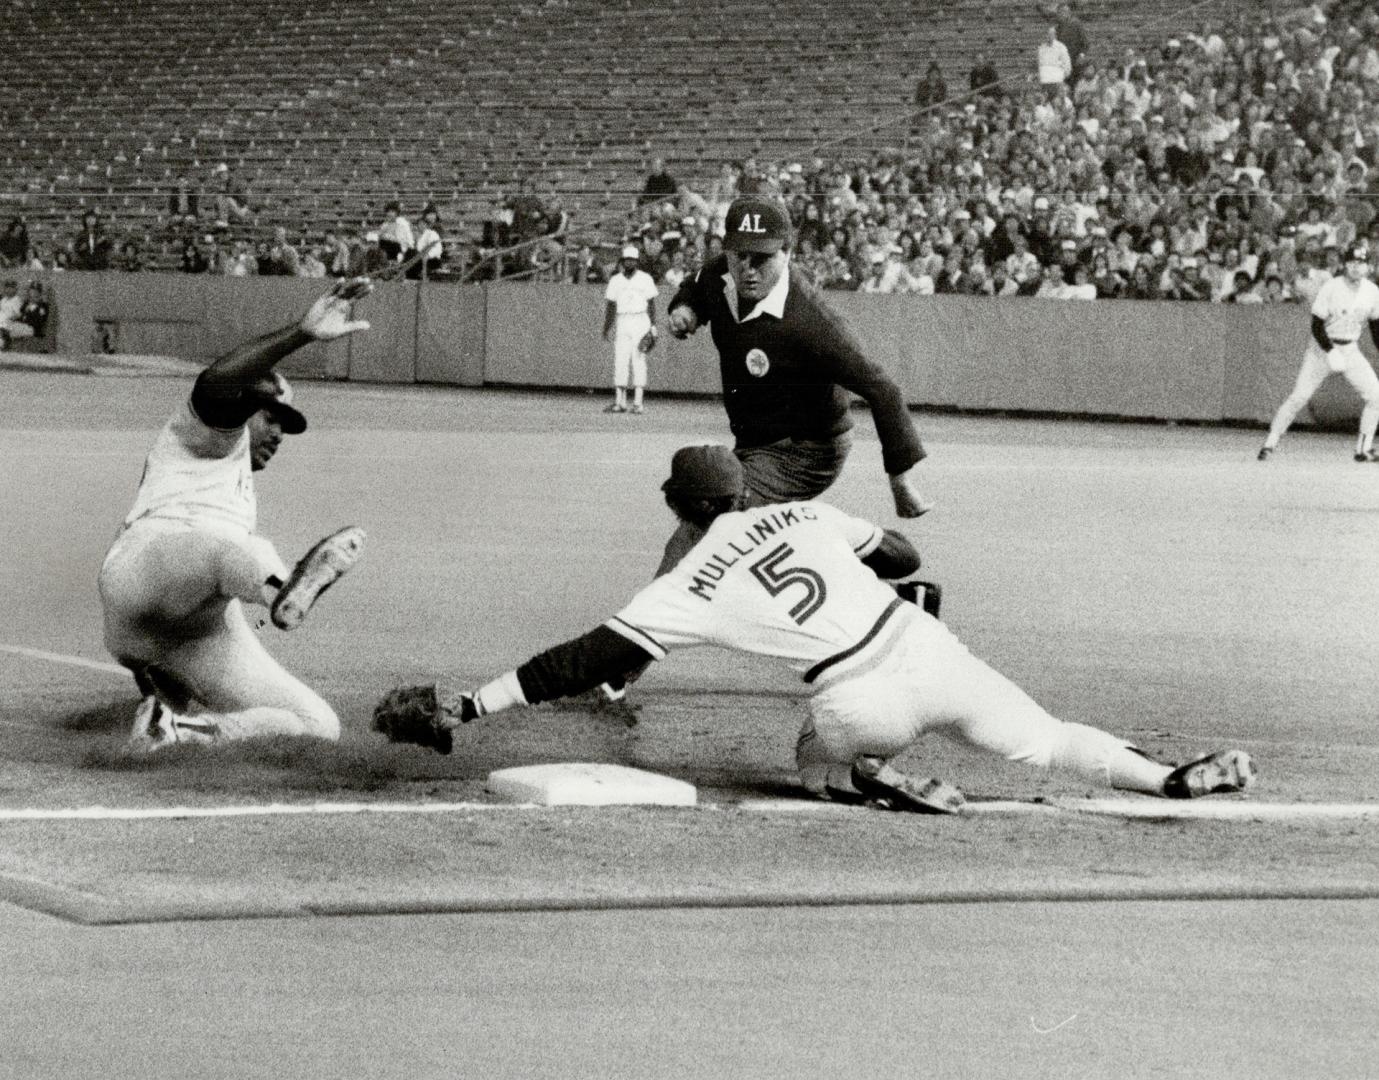 He's safe! It looks like Rance Mulliniks has Don Baylor out at third, but the Yankee designated hitter avoided the tag and was called safe by umpire R(...)